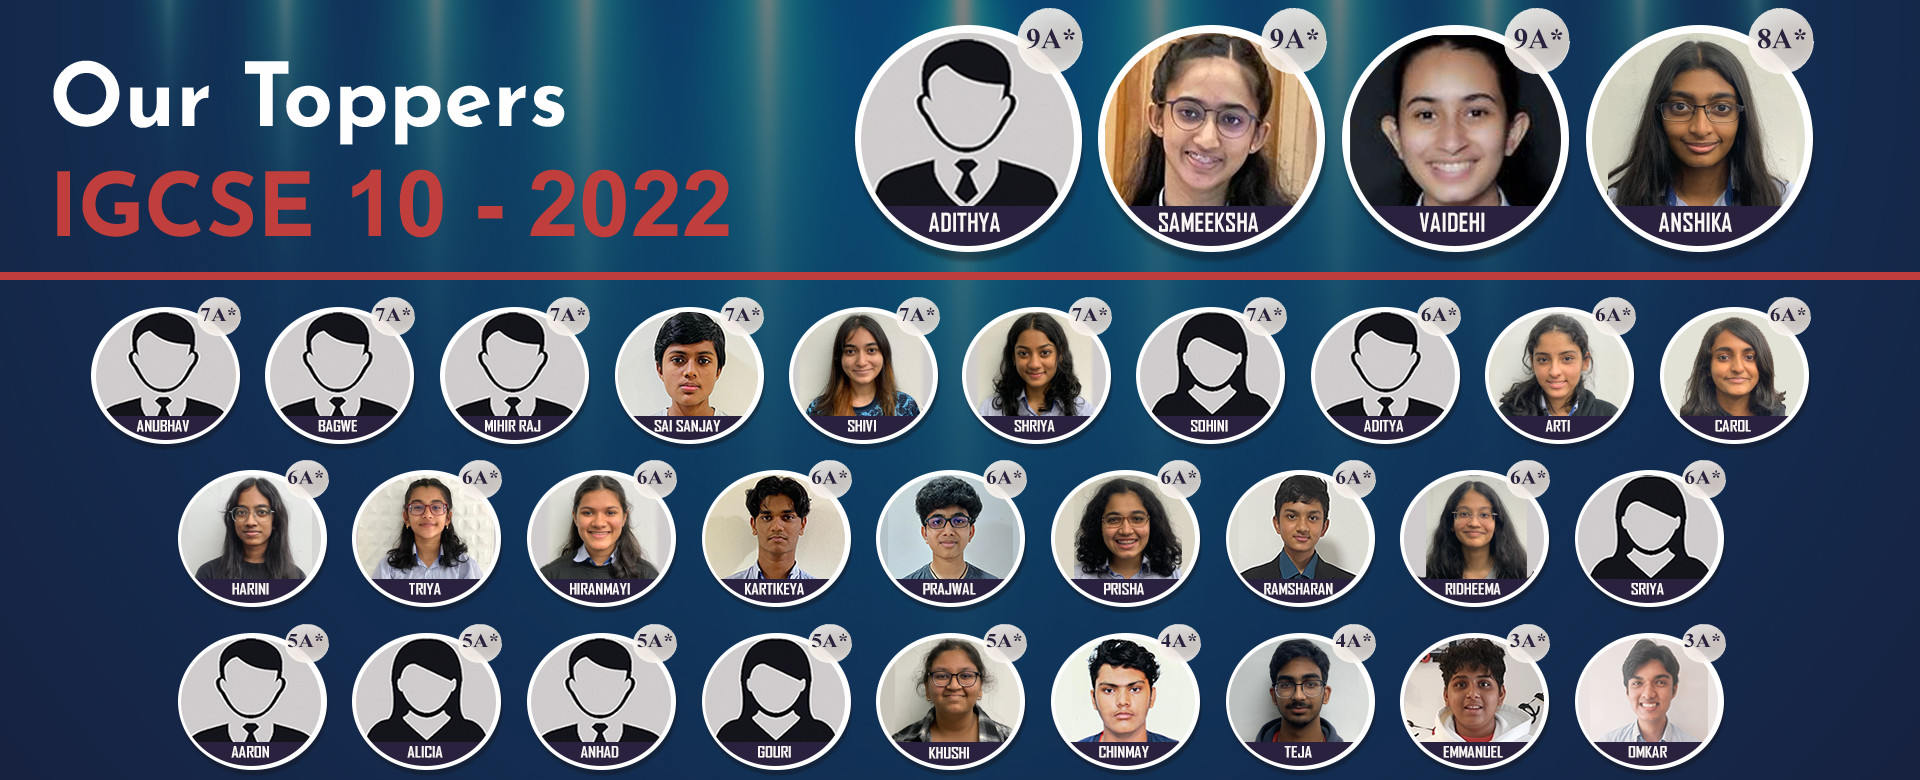 IGCSE 10 Toppers 2022